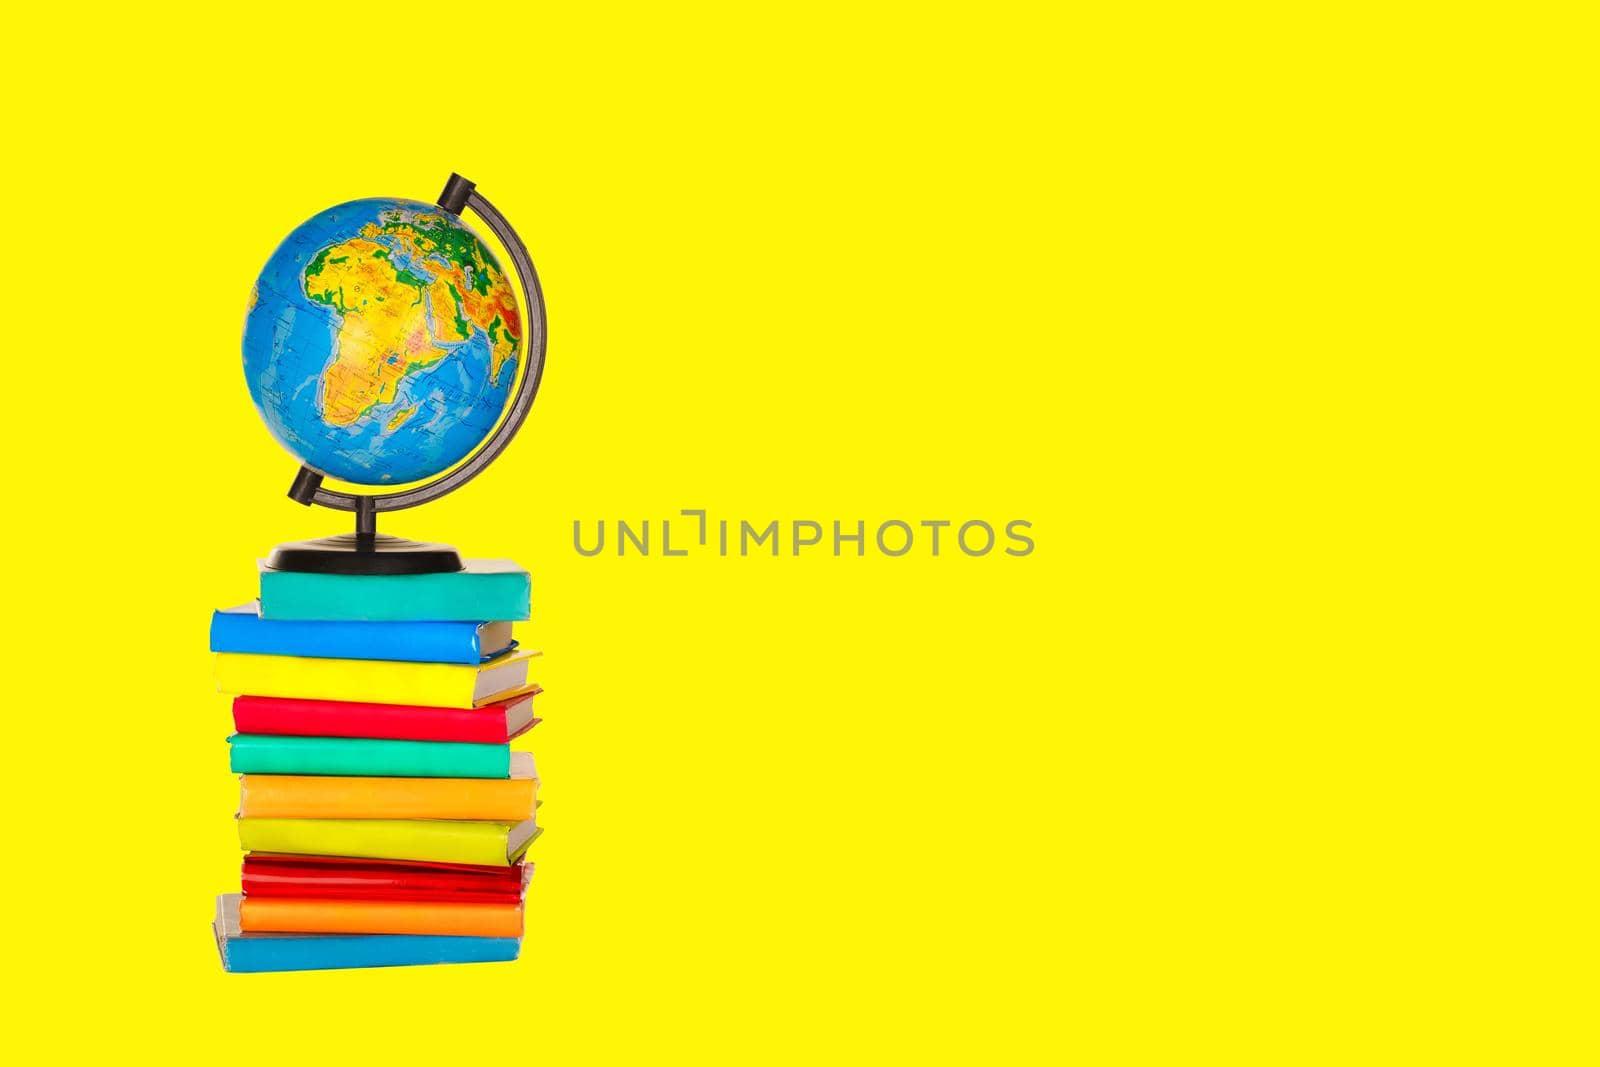 Books, a globe on a yellow background. Back to school concept Space for text